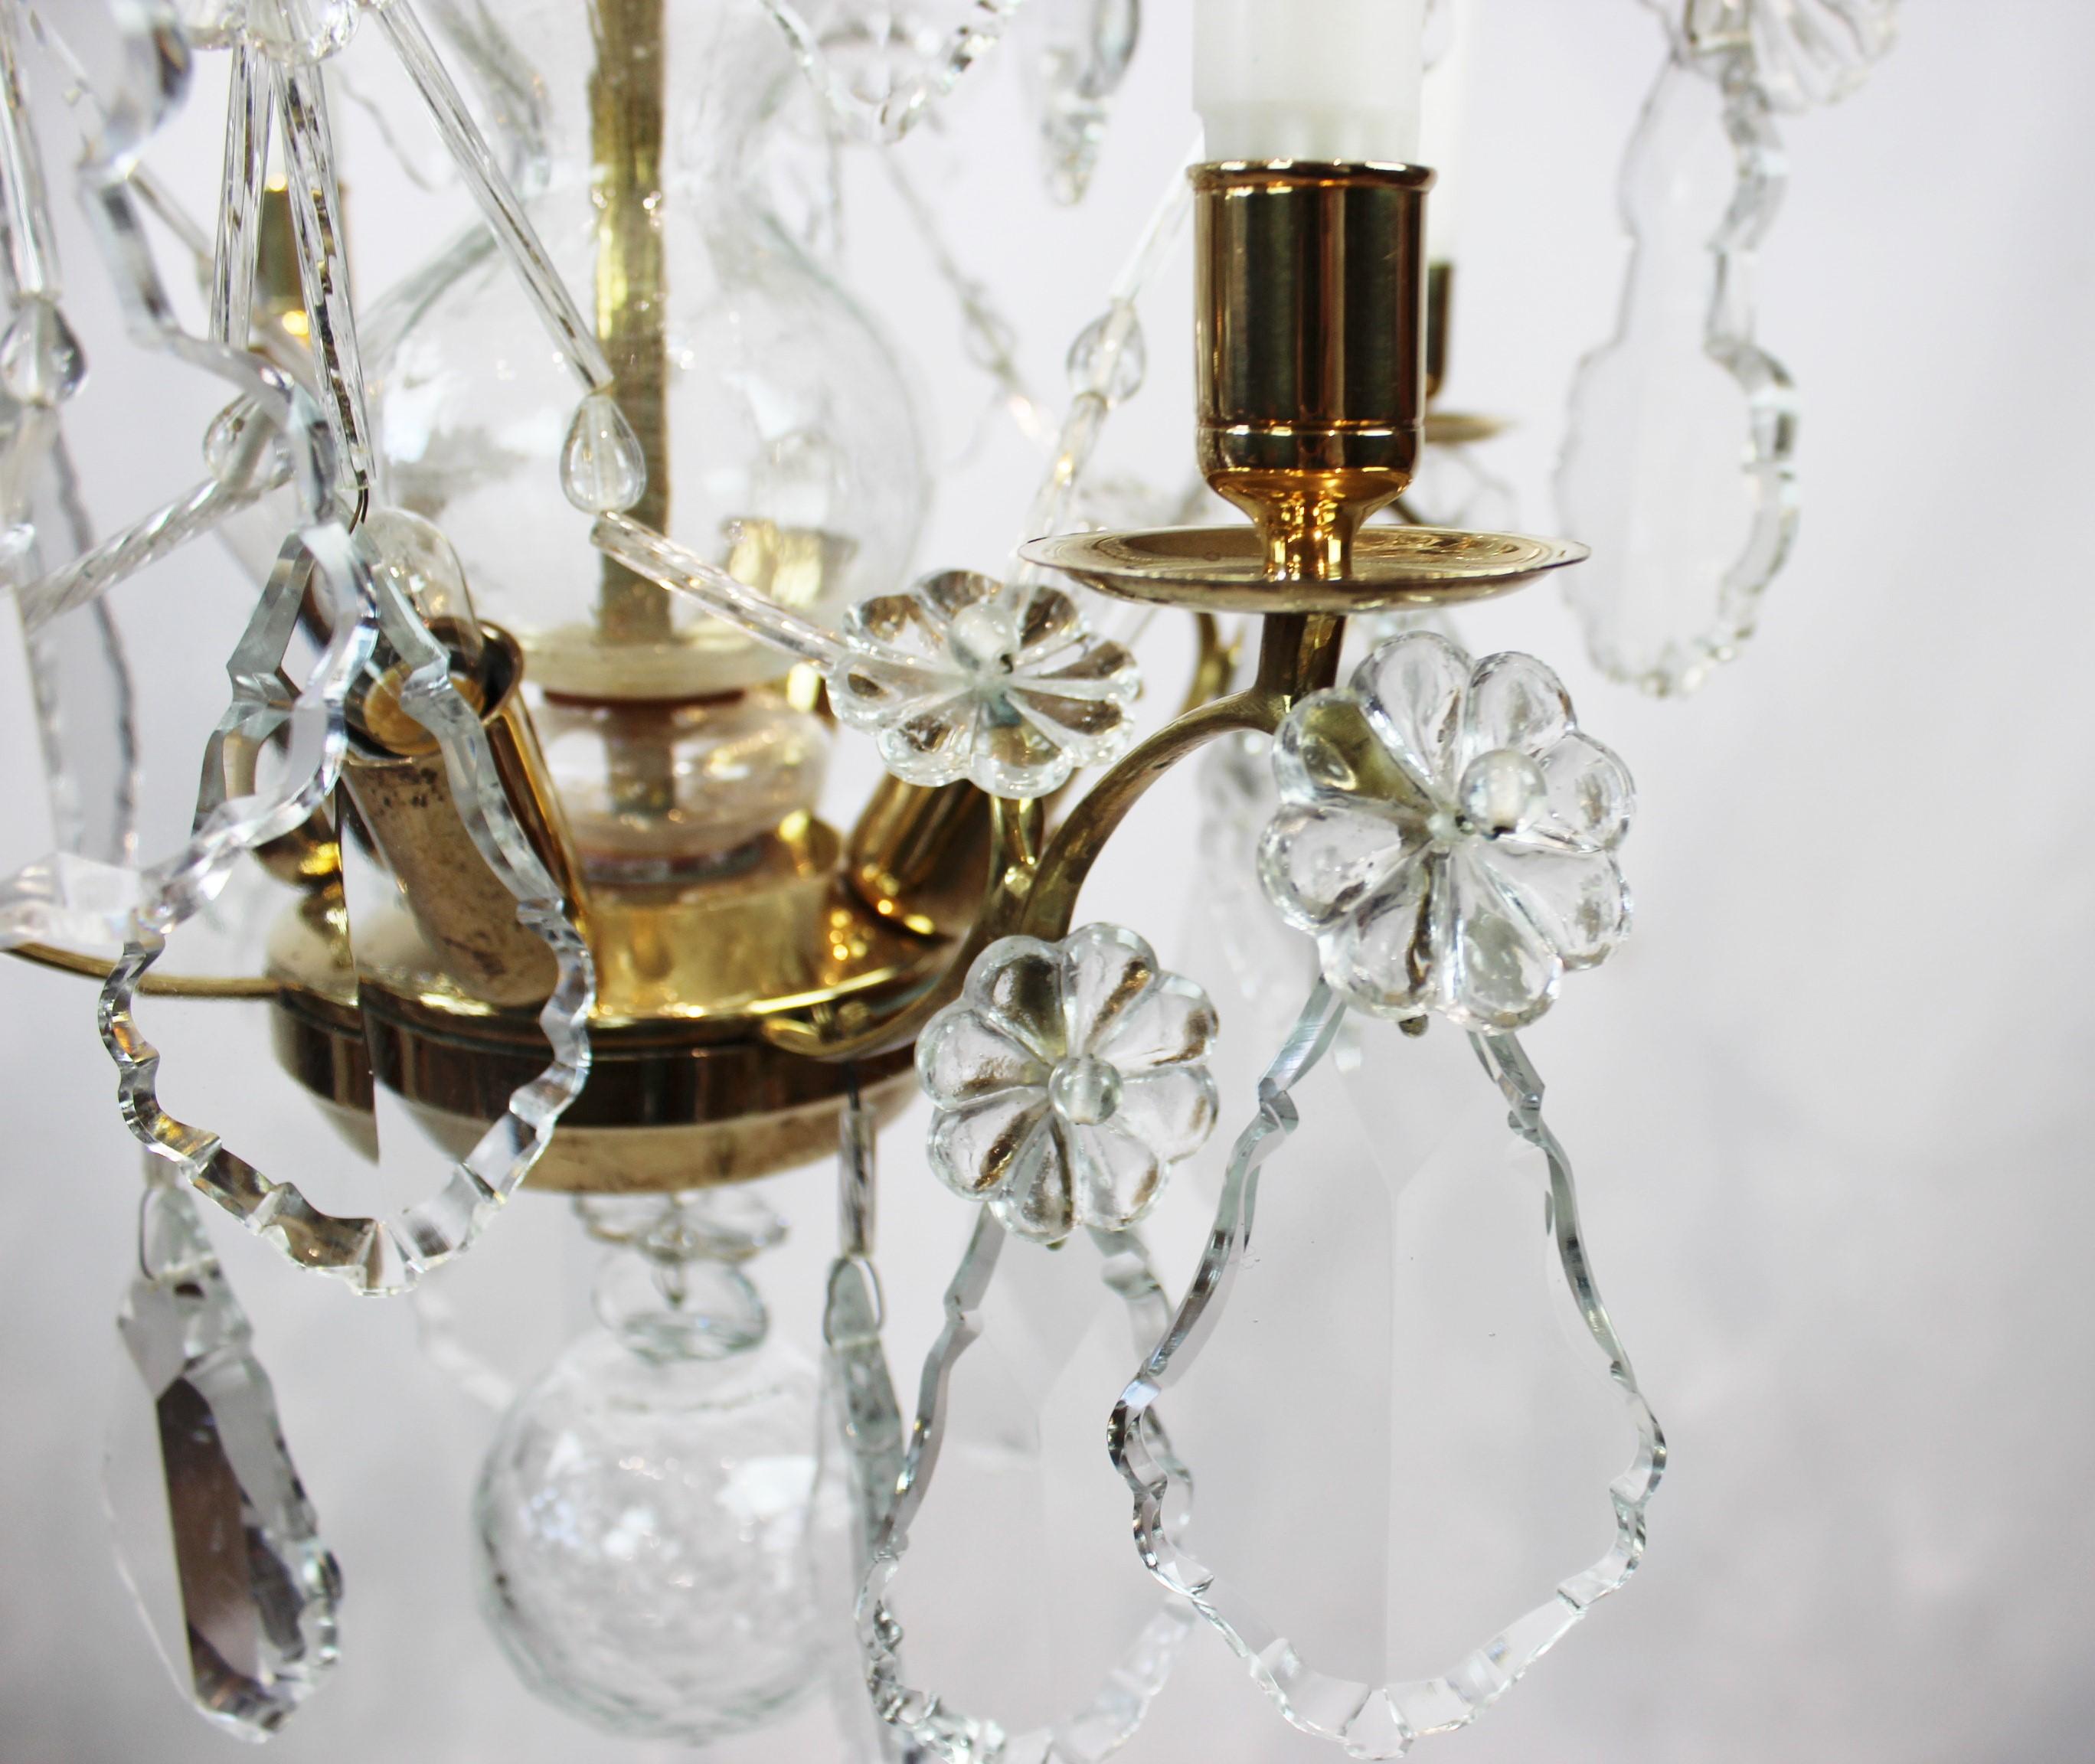 French Chandelier of Brass and Polished Prisms from France, circa 1920s